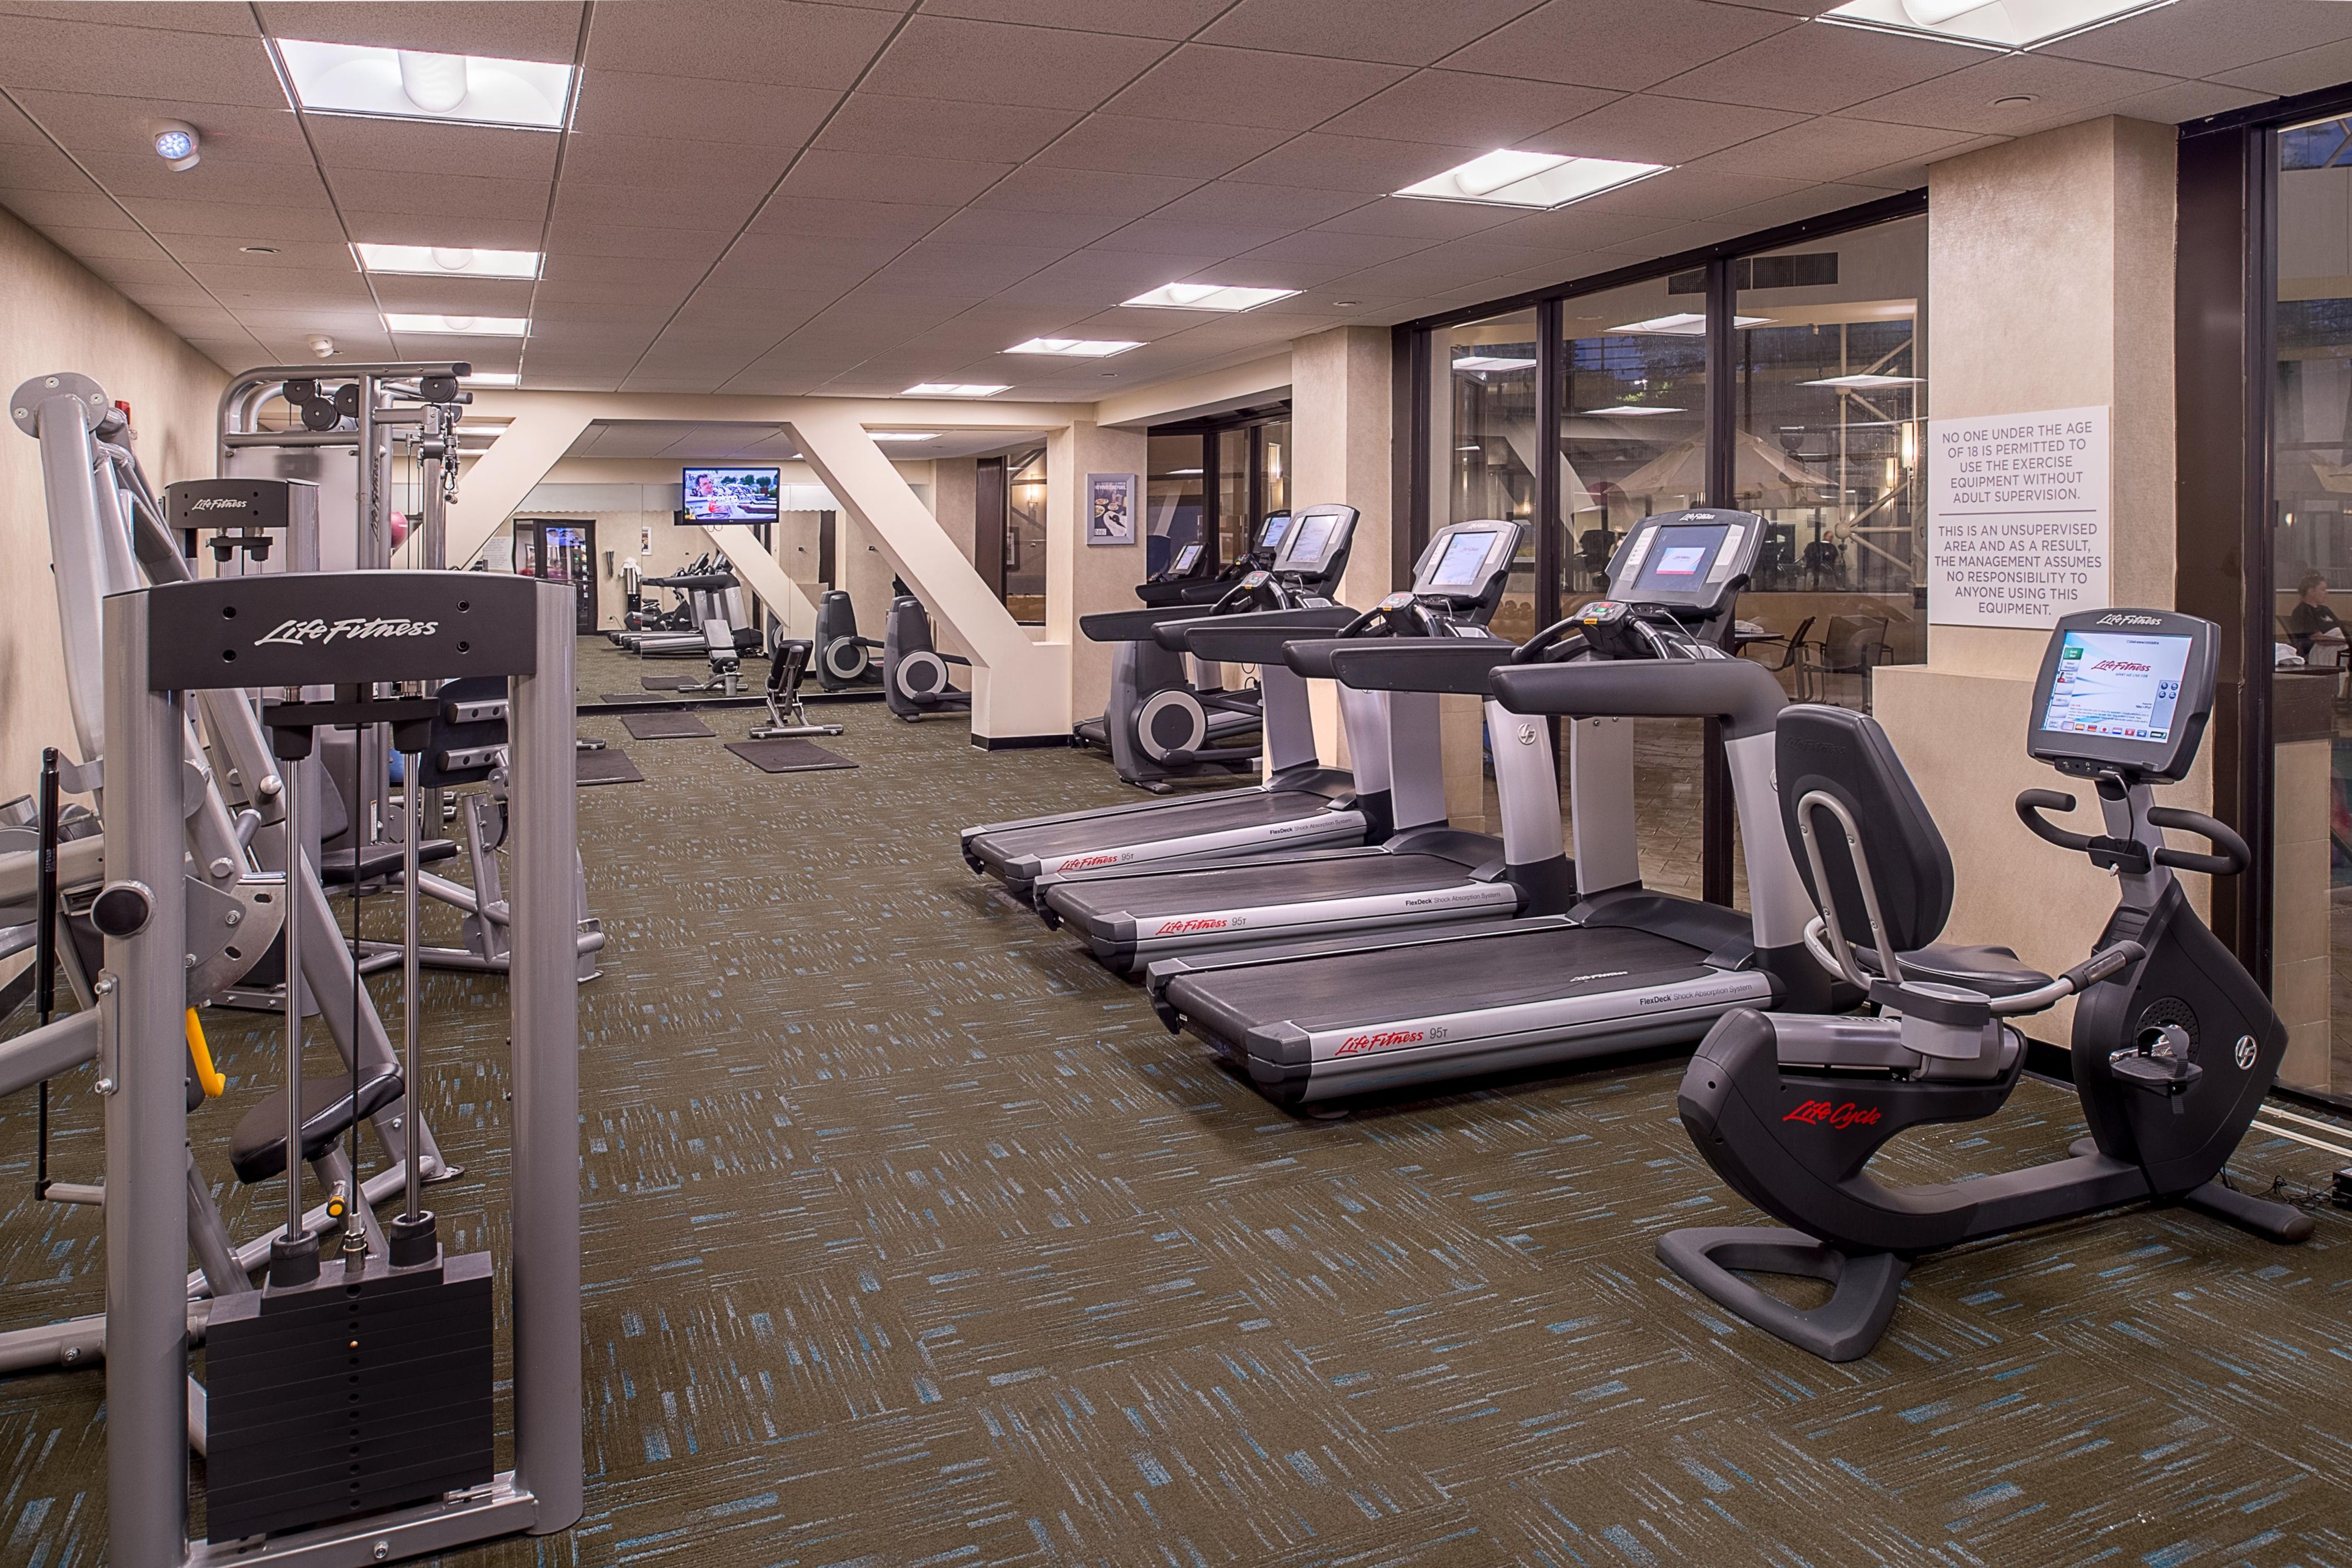 Fitness Center located on the Lower Level